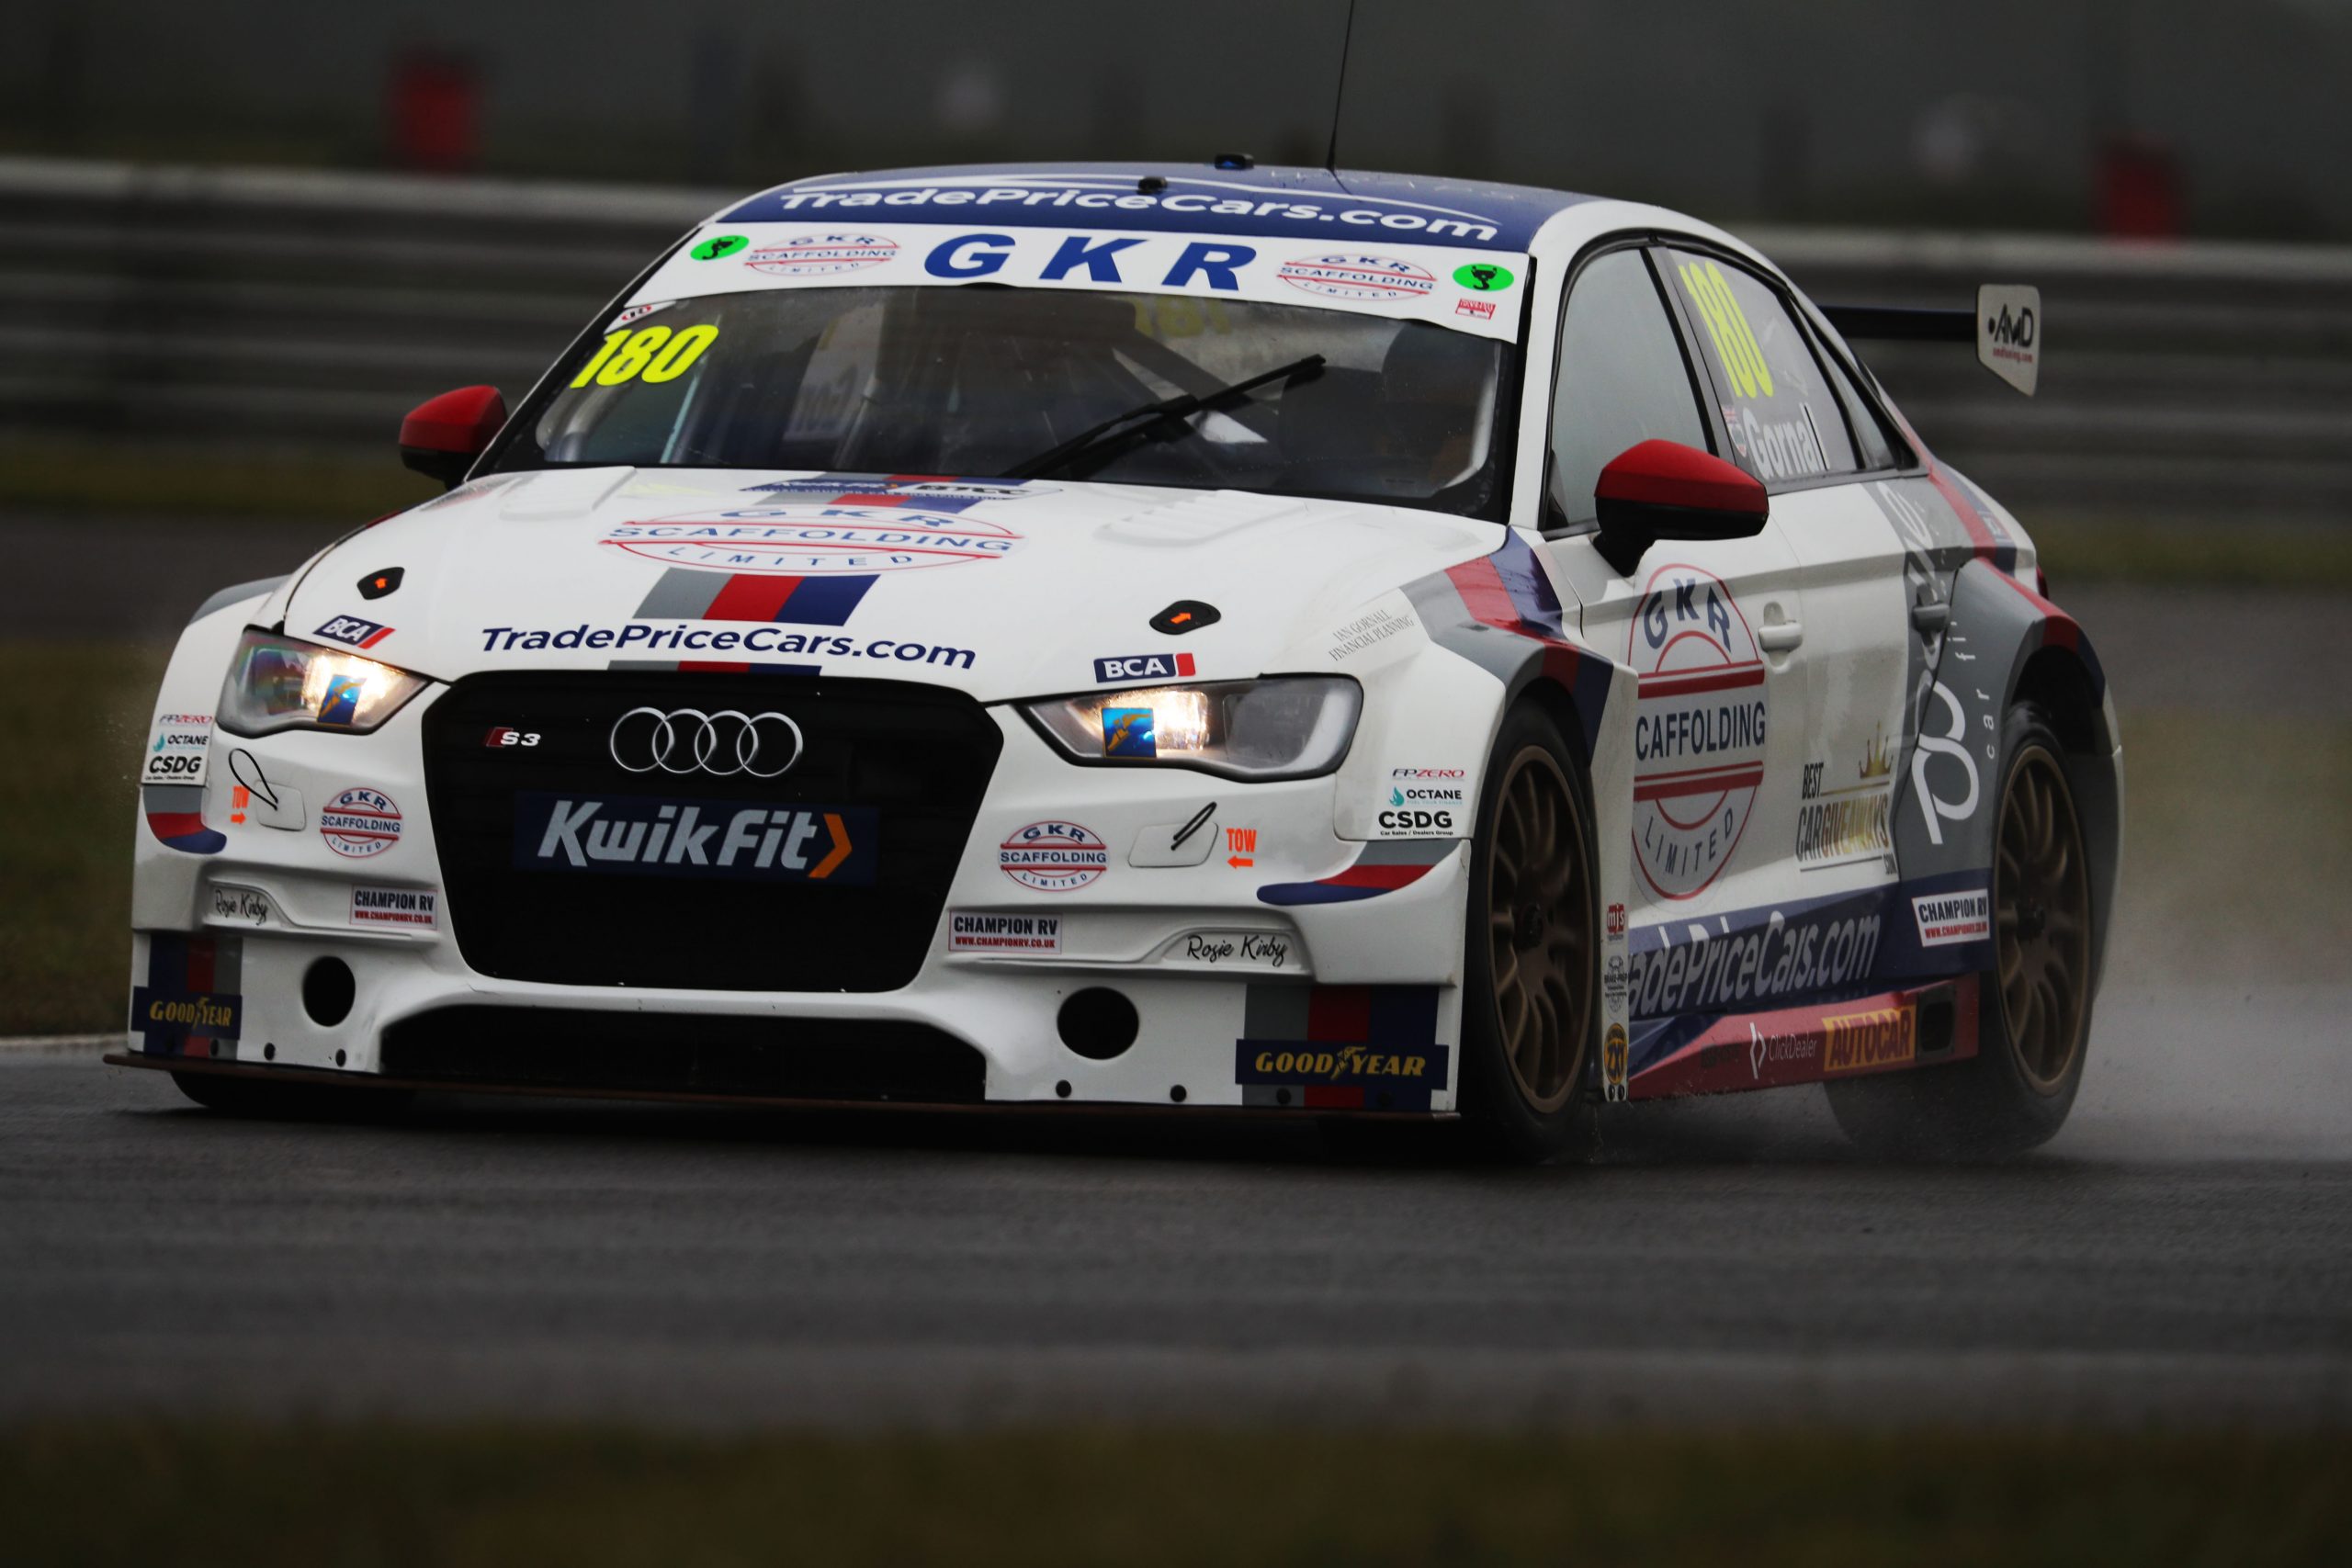 Strong points the aim for GKR TradePriceCars.com at Donington Park